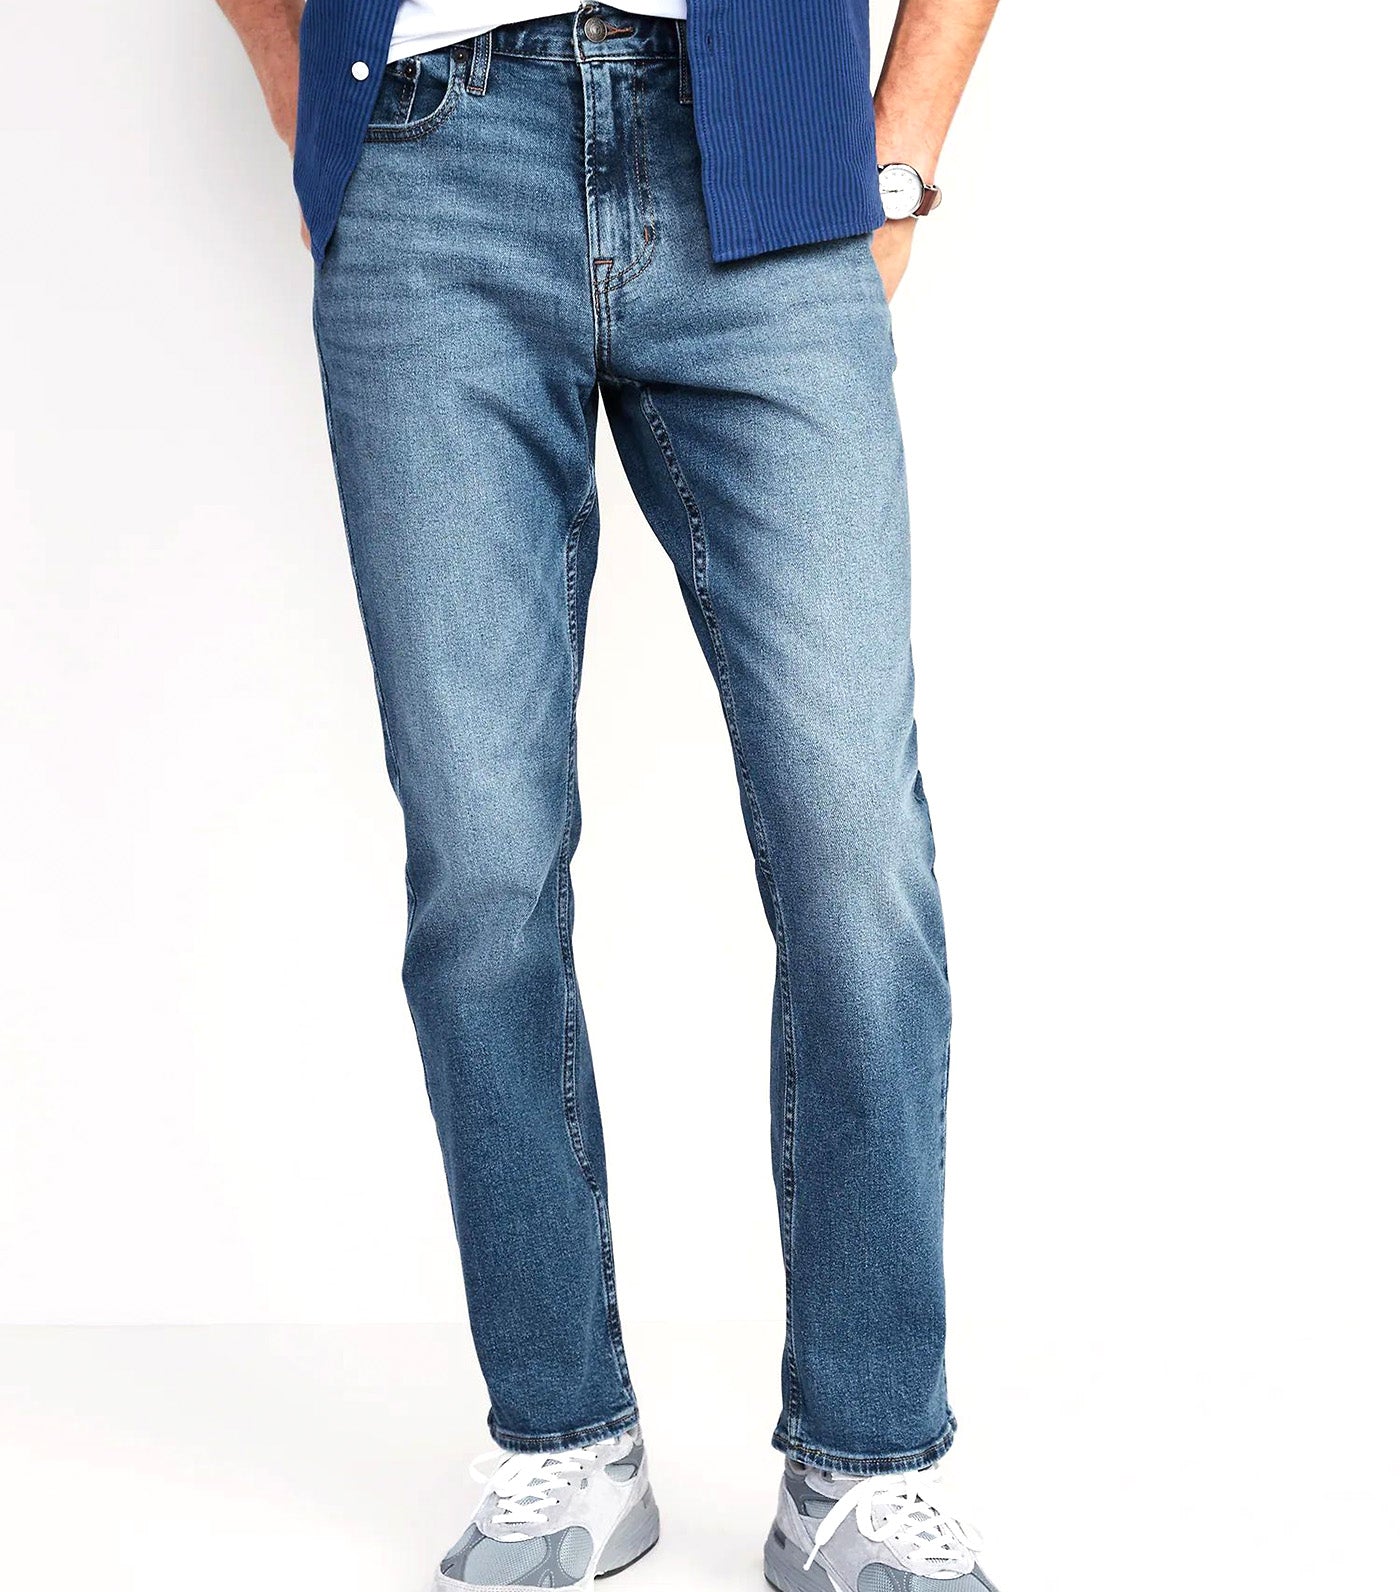 Straight Built-In Flex Jeans for Men Light Wash with Tint